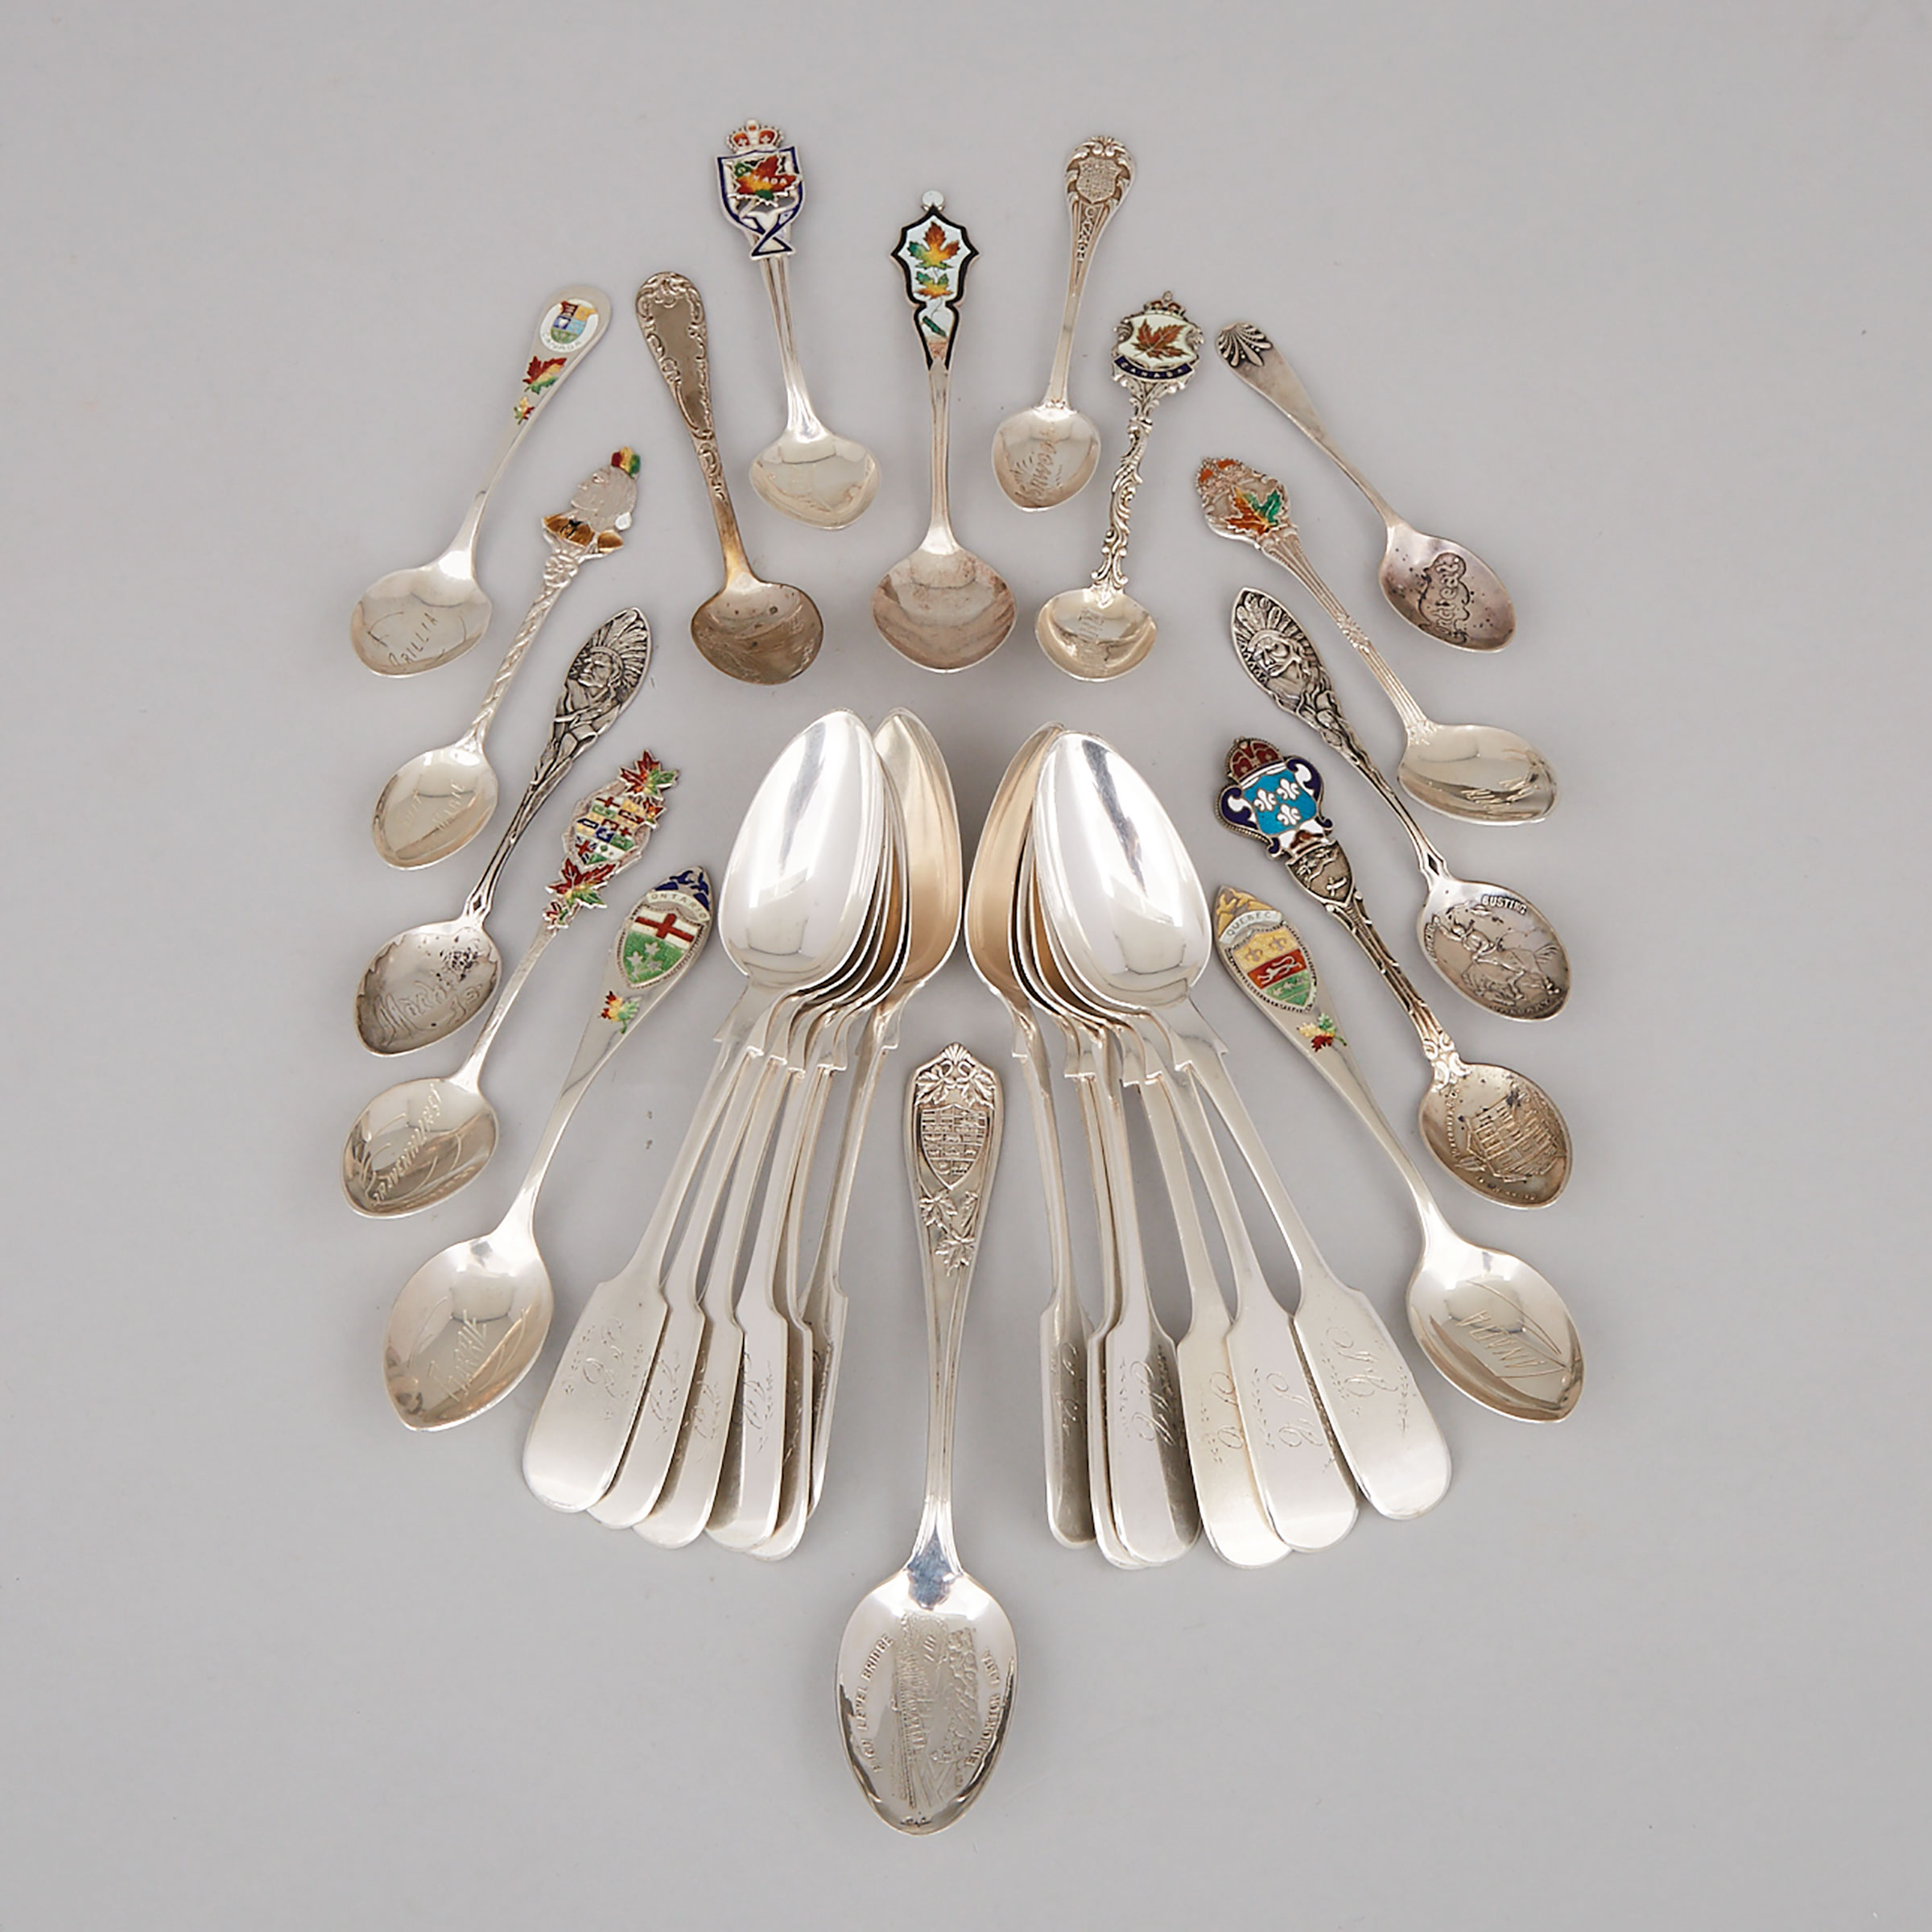 Twelve Canadian Silver Fiddle Pattern Tea Spoons, Hendery & Leslie, Montreal, Que. for Canada Mfg. Co., and Sixteen Souvenir Spoons, late 19th/20th century